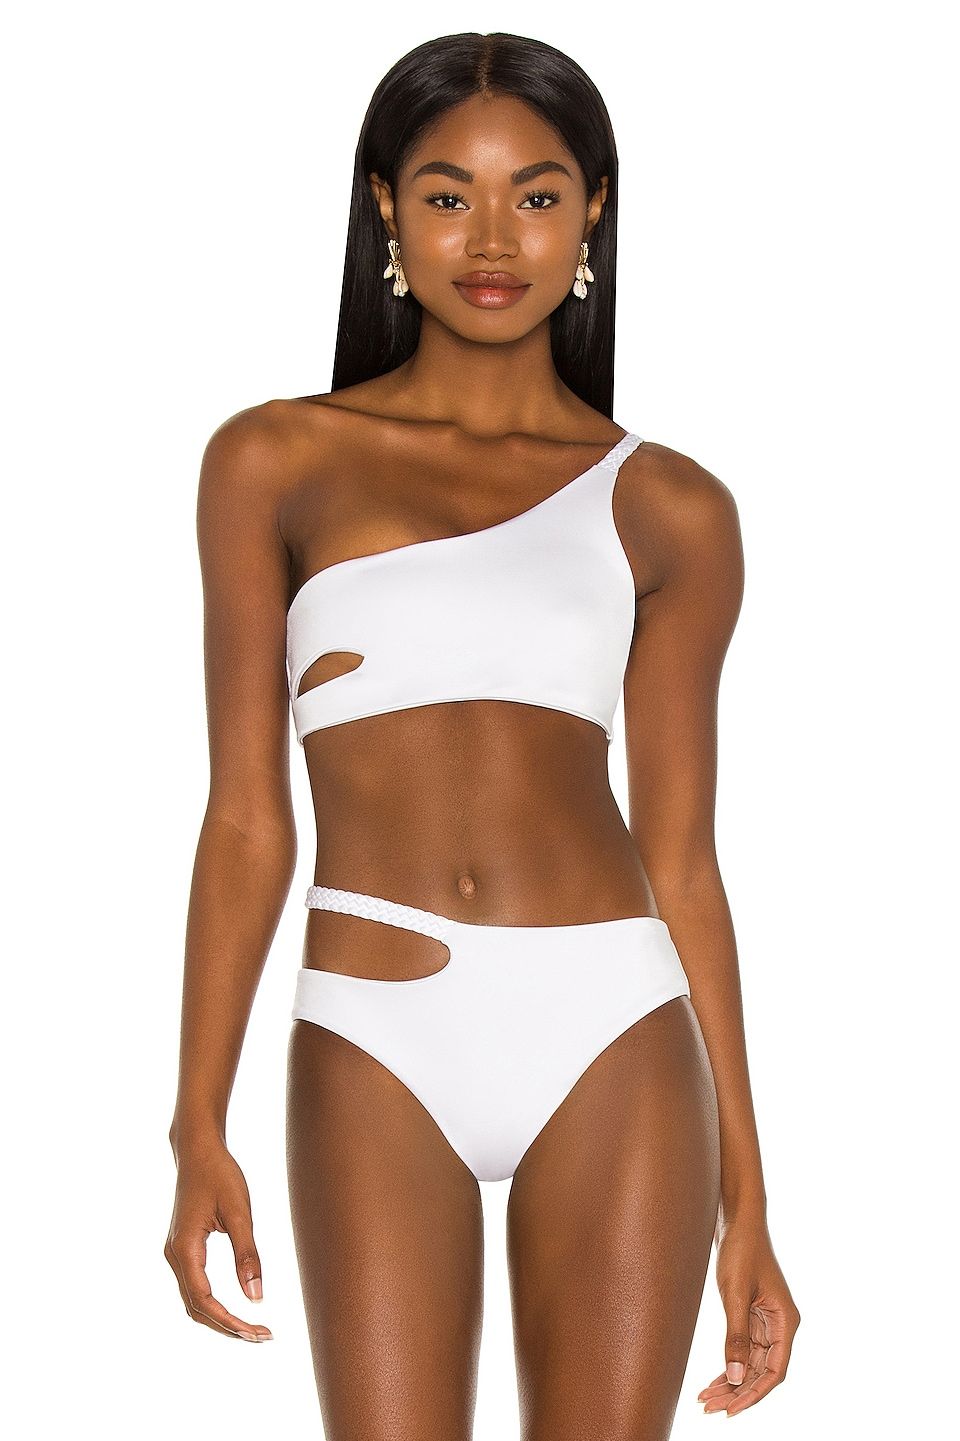 Black owned and eco friendly  Swimwear, Fashion, Bra cup sizes